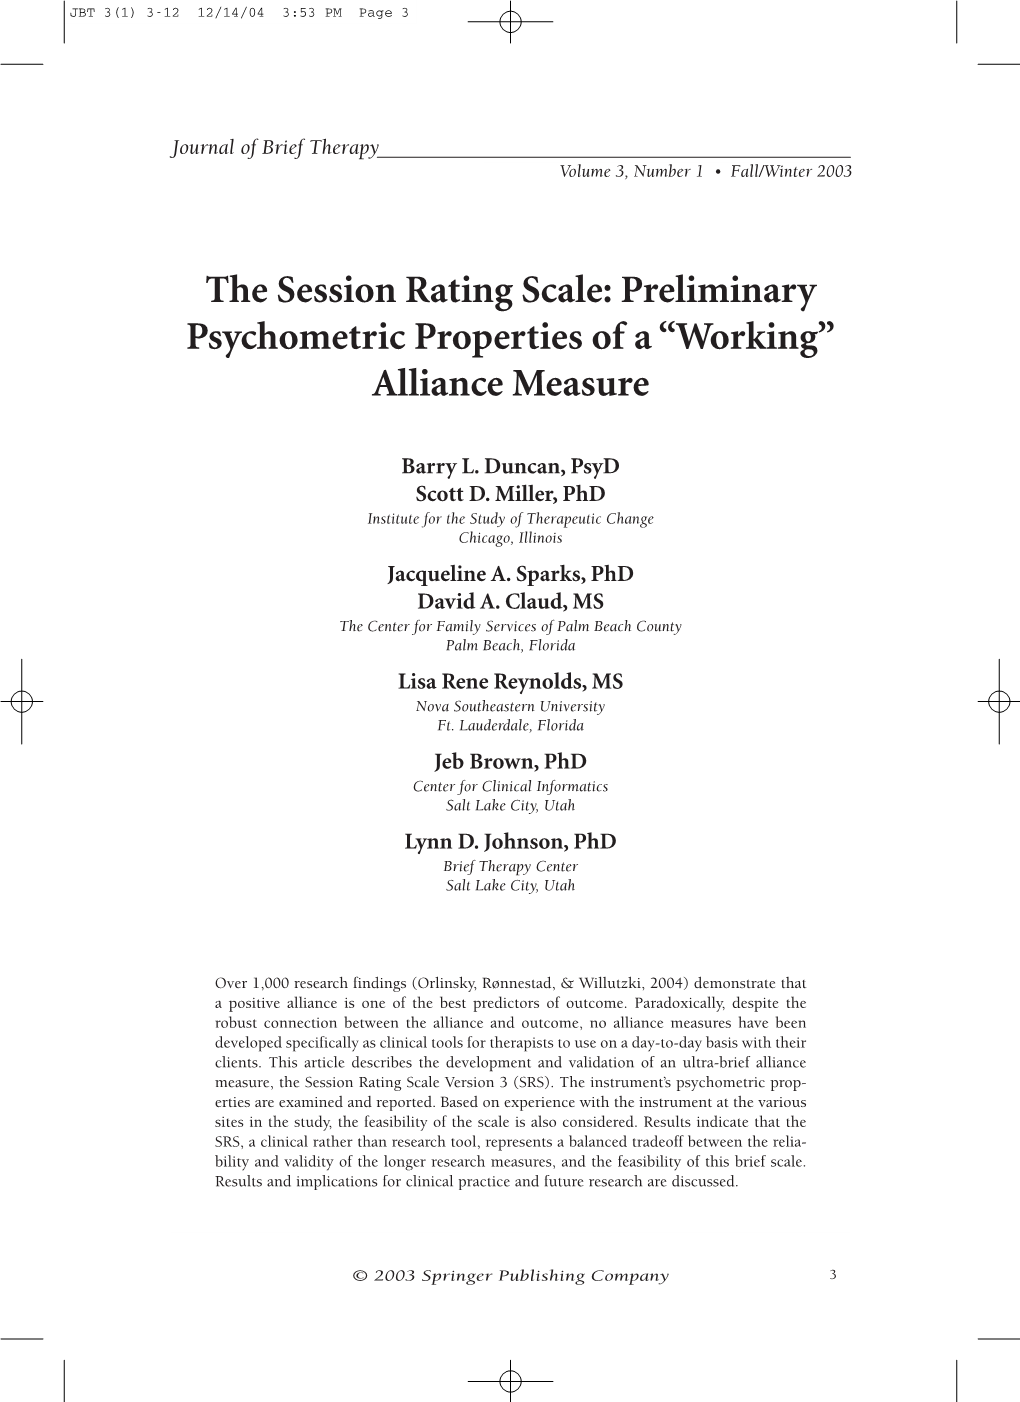 The Session Rating Scale: Preliminary Psychometric Properties of a “Working” Alliance Measure